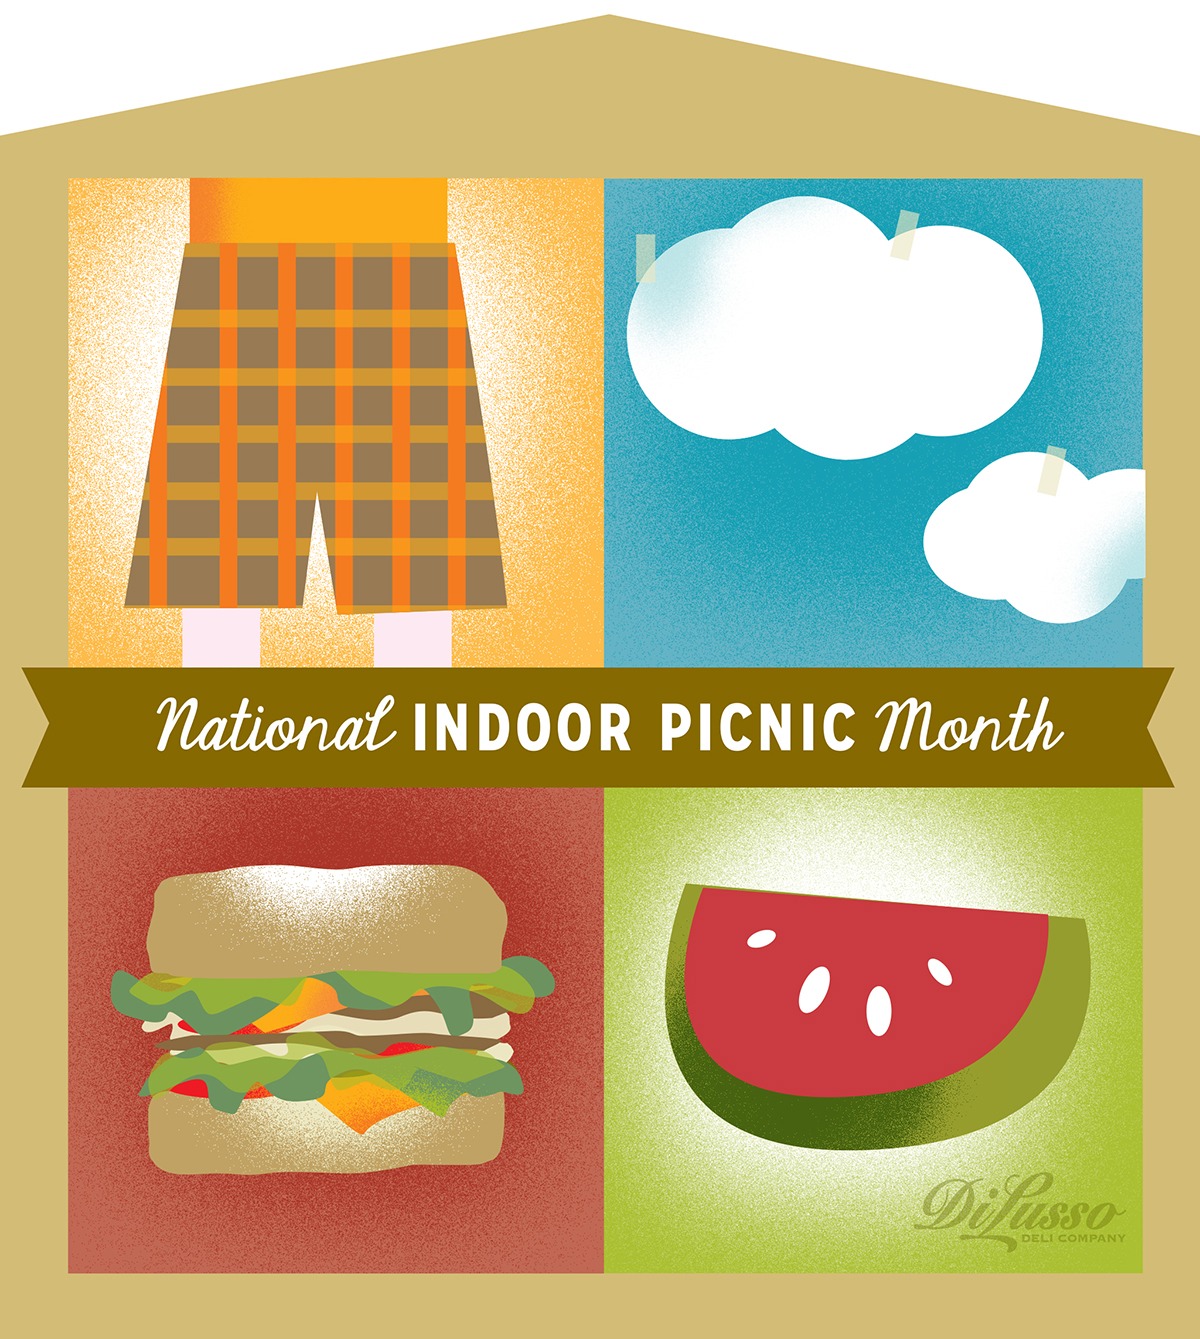 It’s official! We declare February National Indoor Picnic Month!